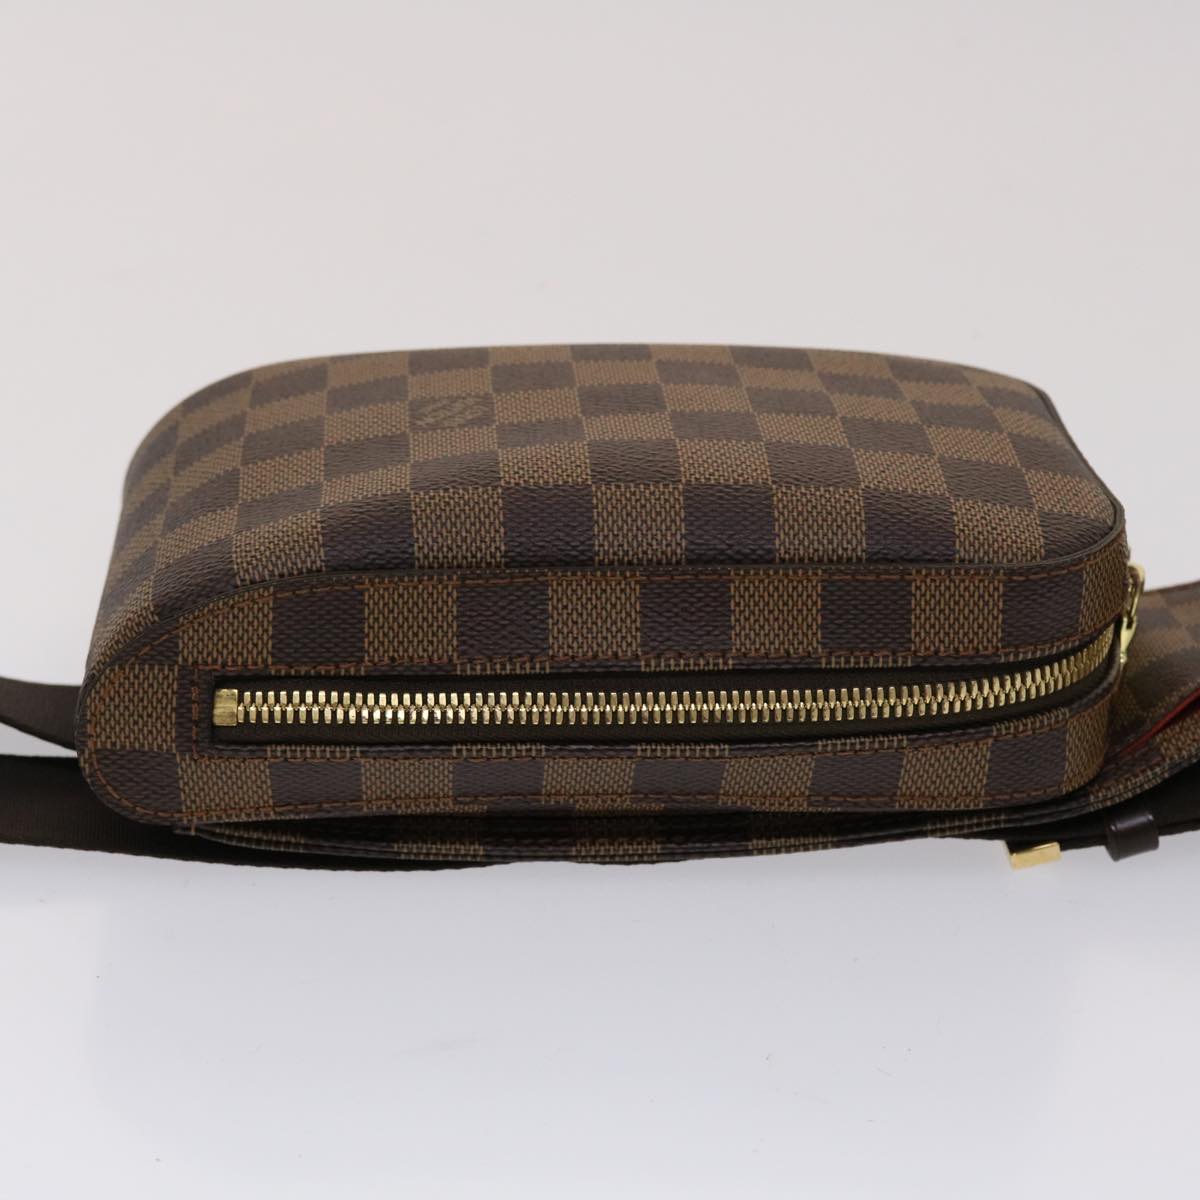 【Instagram 24 hours SALE】LOUIS VUITTON Damier Ebene Geronimos Shoulder Bag N51994 LV Auth 46568A    ※Coupon cannot be used